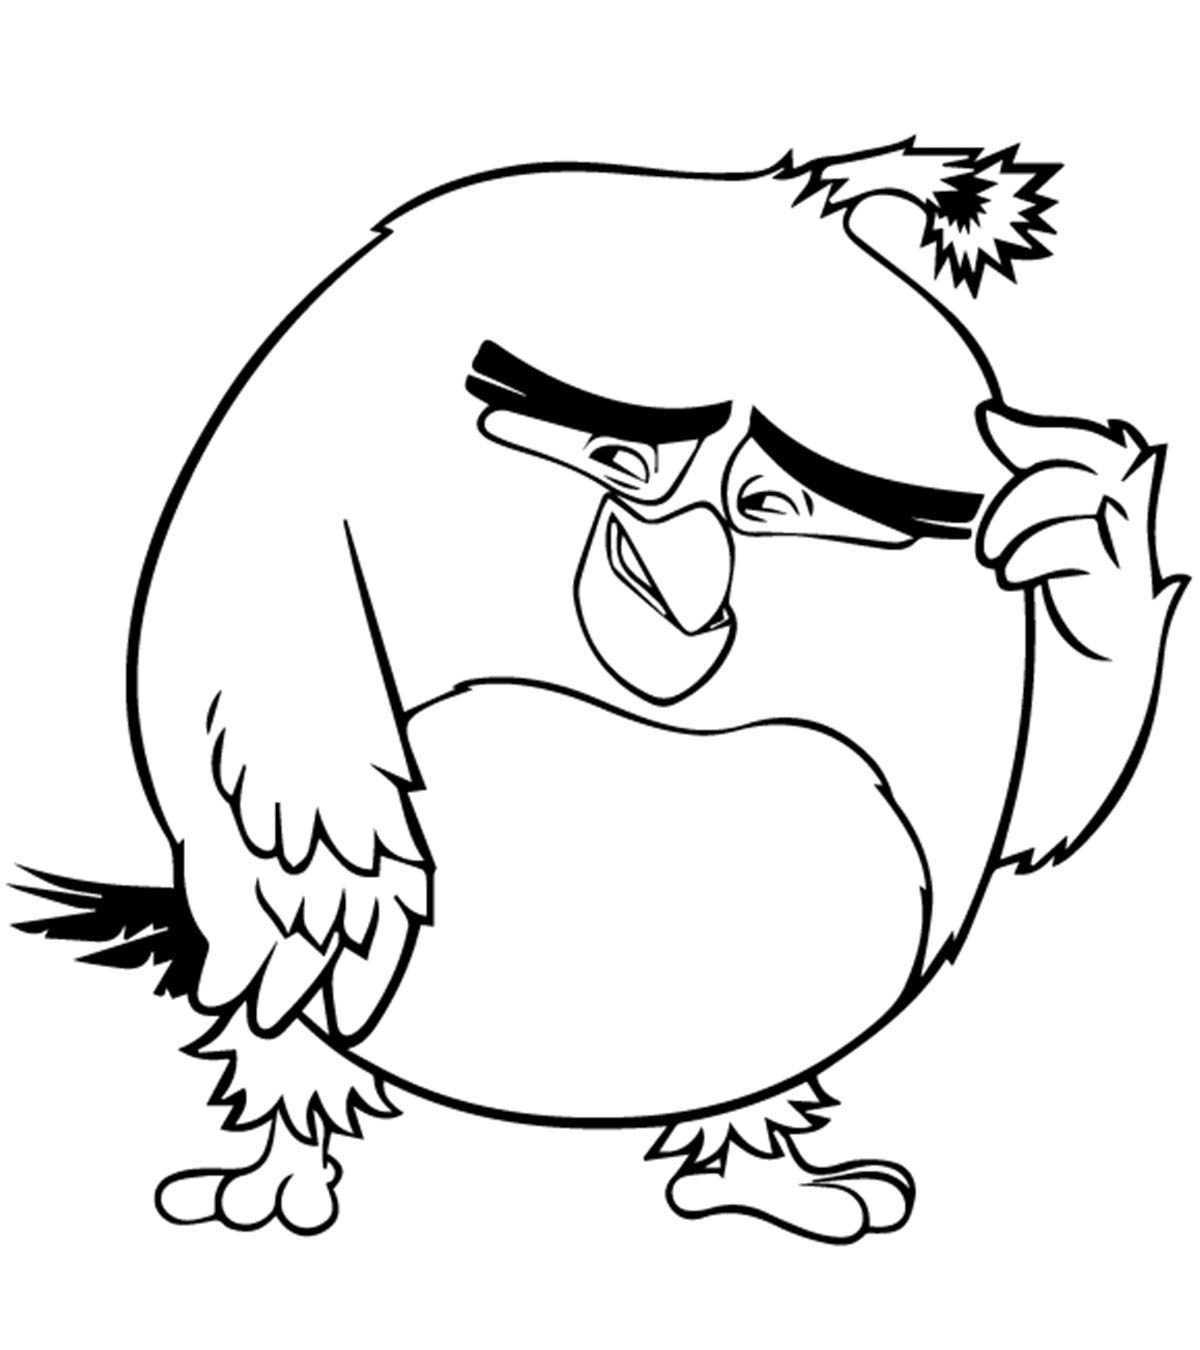 540 Coloring Pages Of Angry Birds 2 Images & Pictures In HD